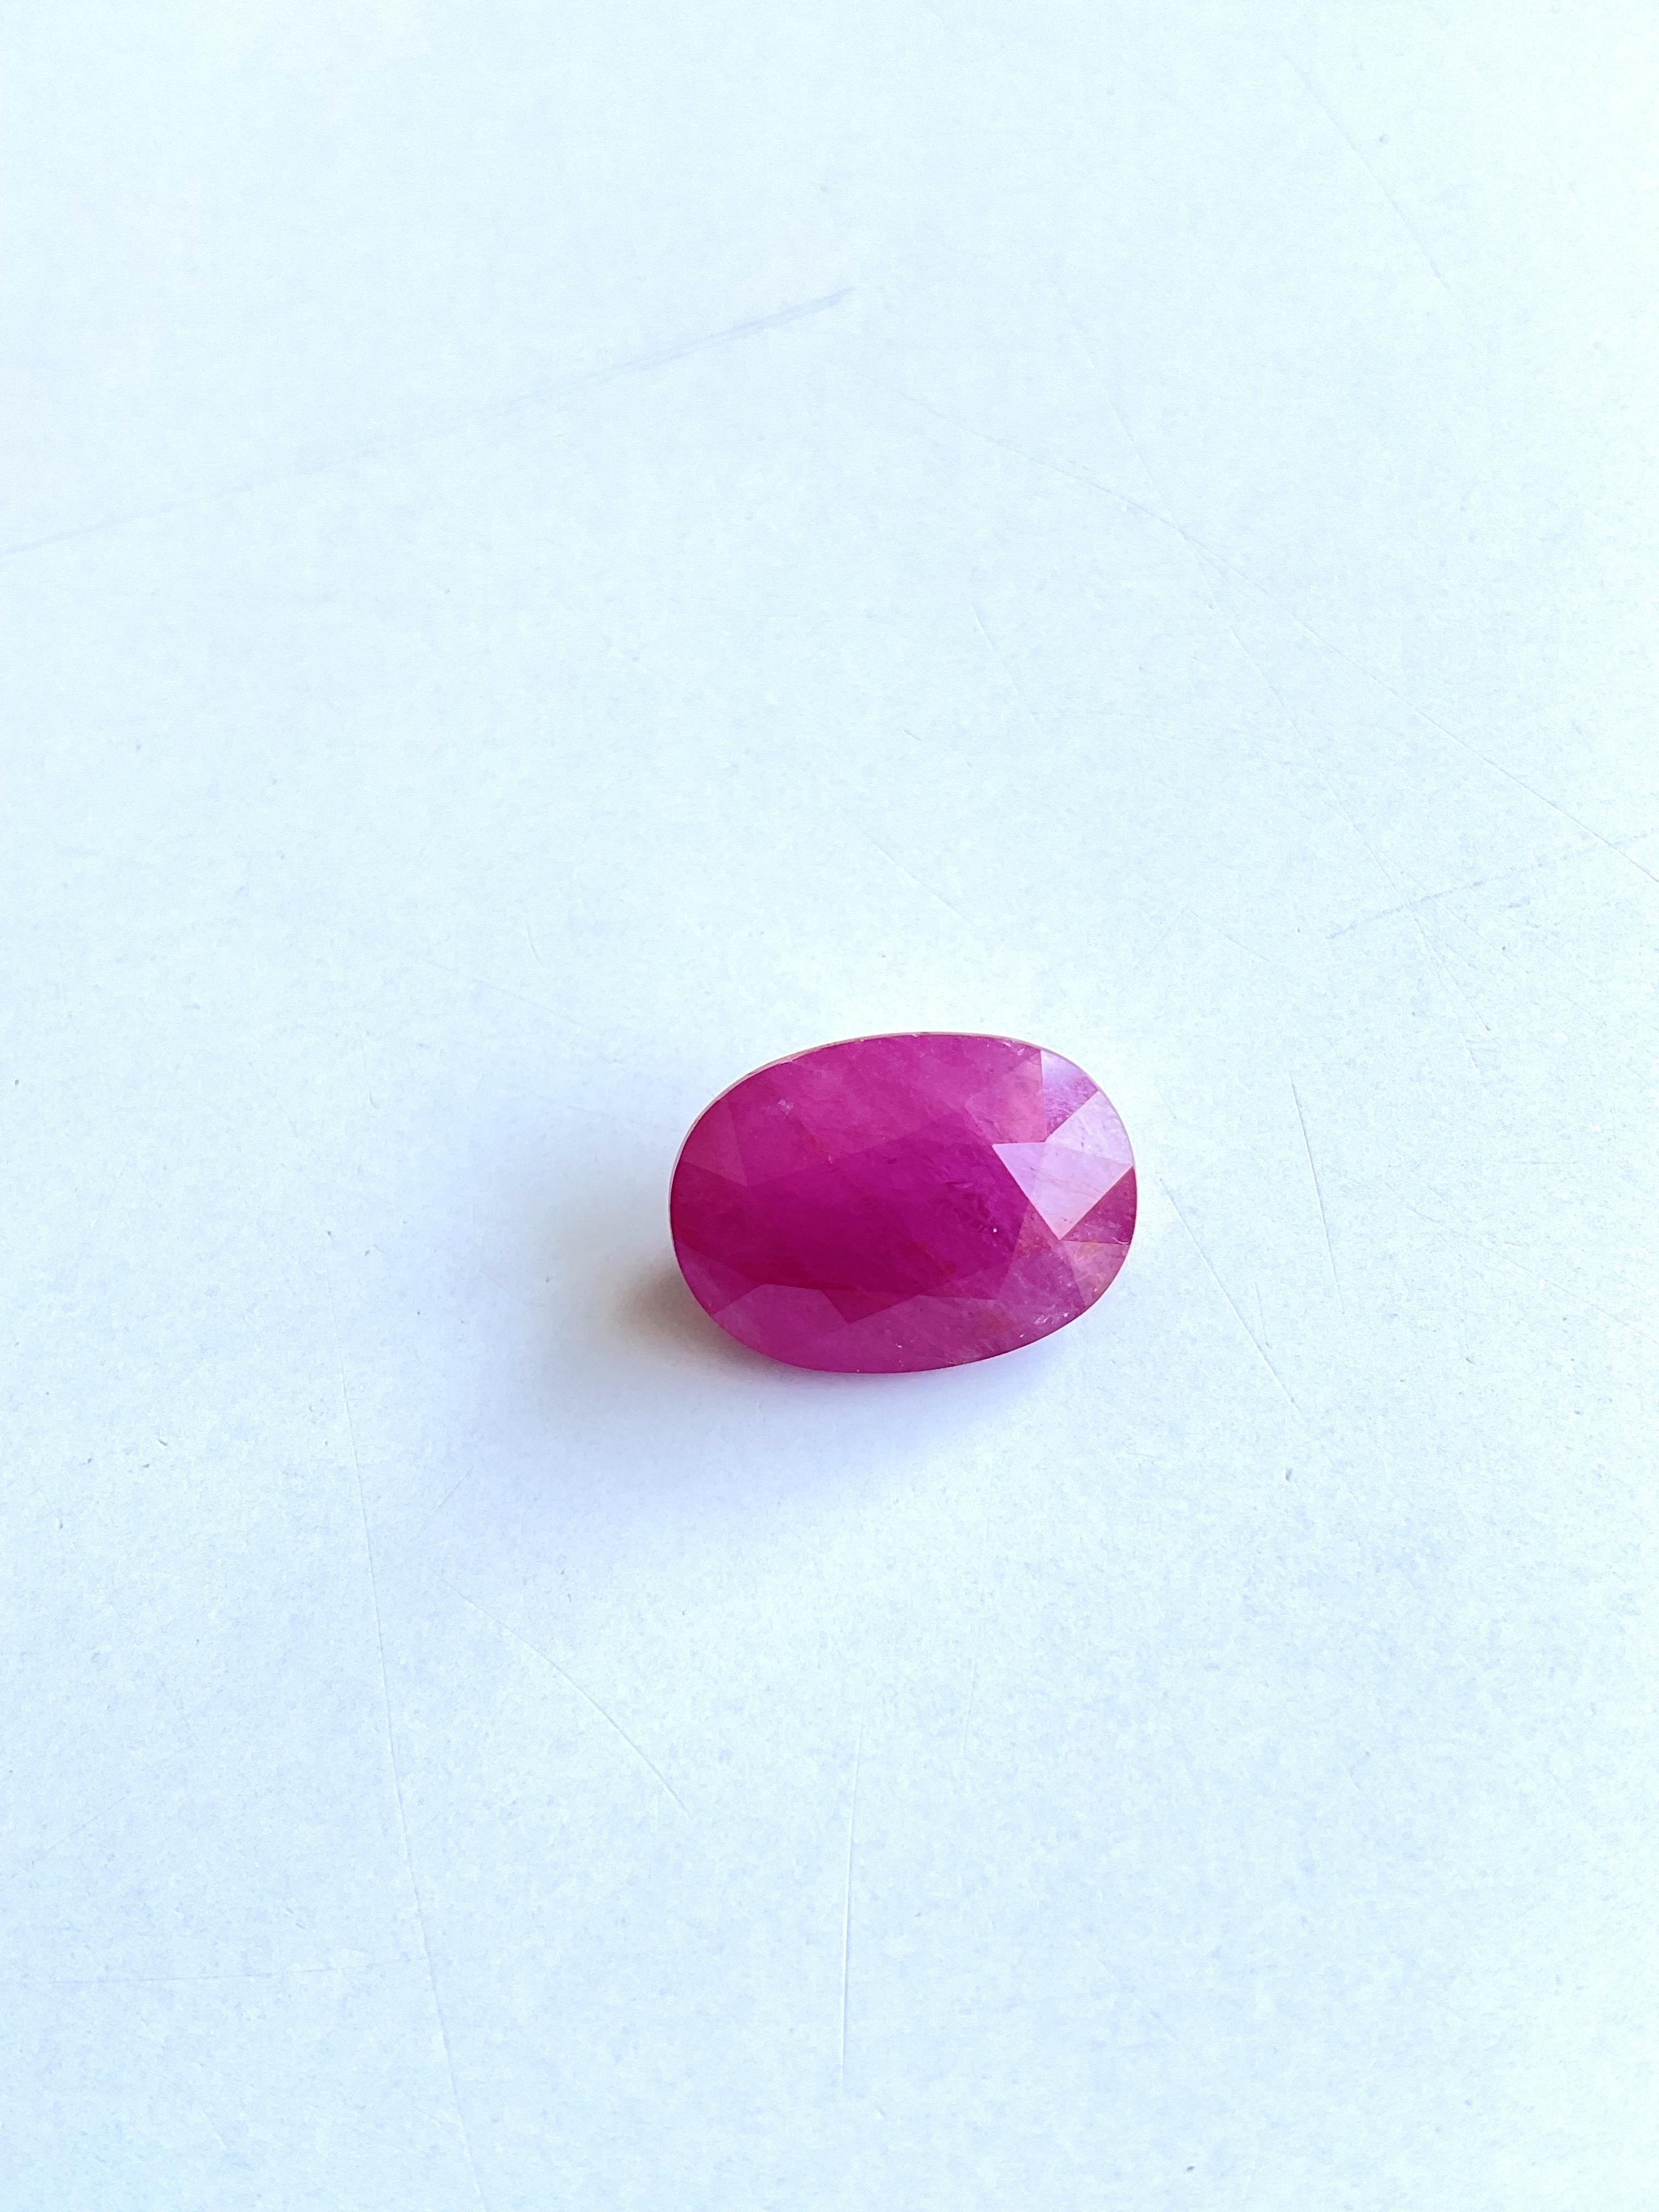 15.61 Carat Burmese No-Heat Ruby Natural Oval Cut Stone For Top Fine Jewelry Gem For Sale 3